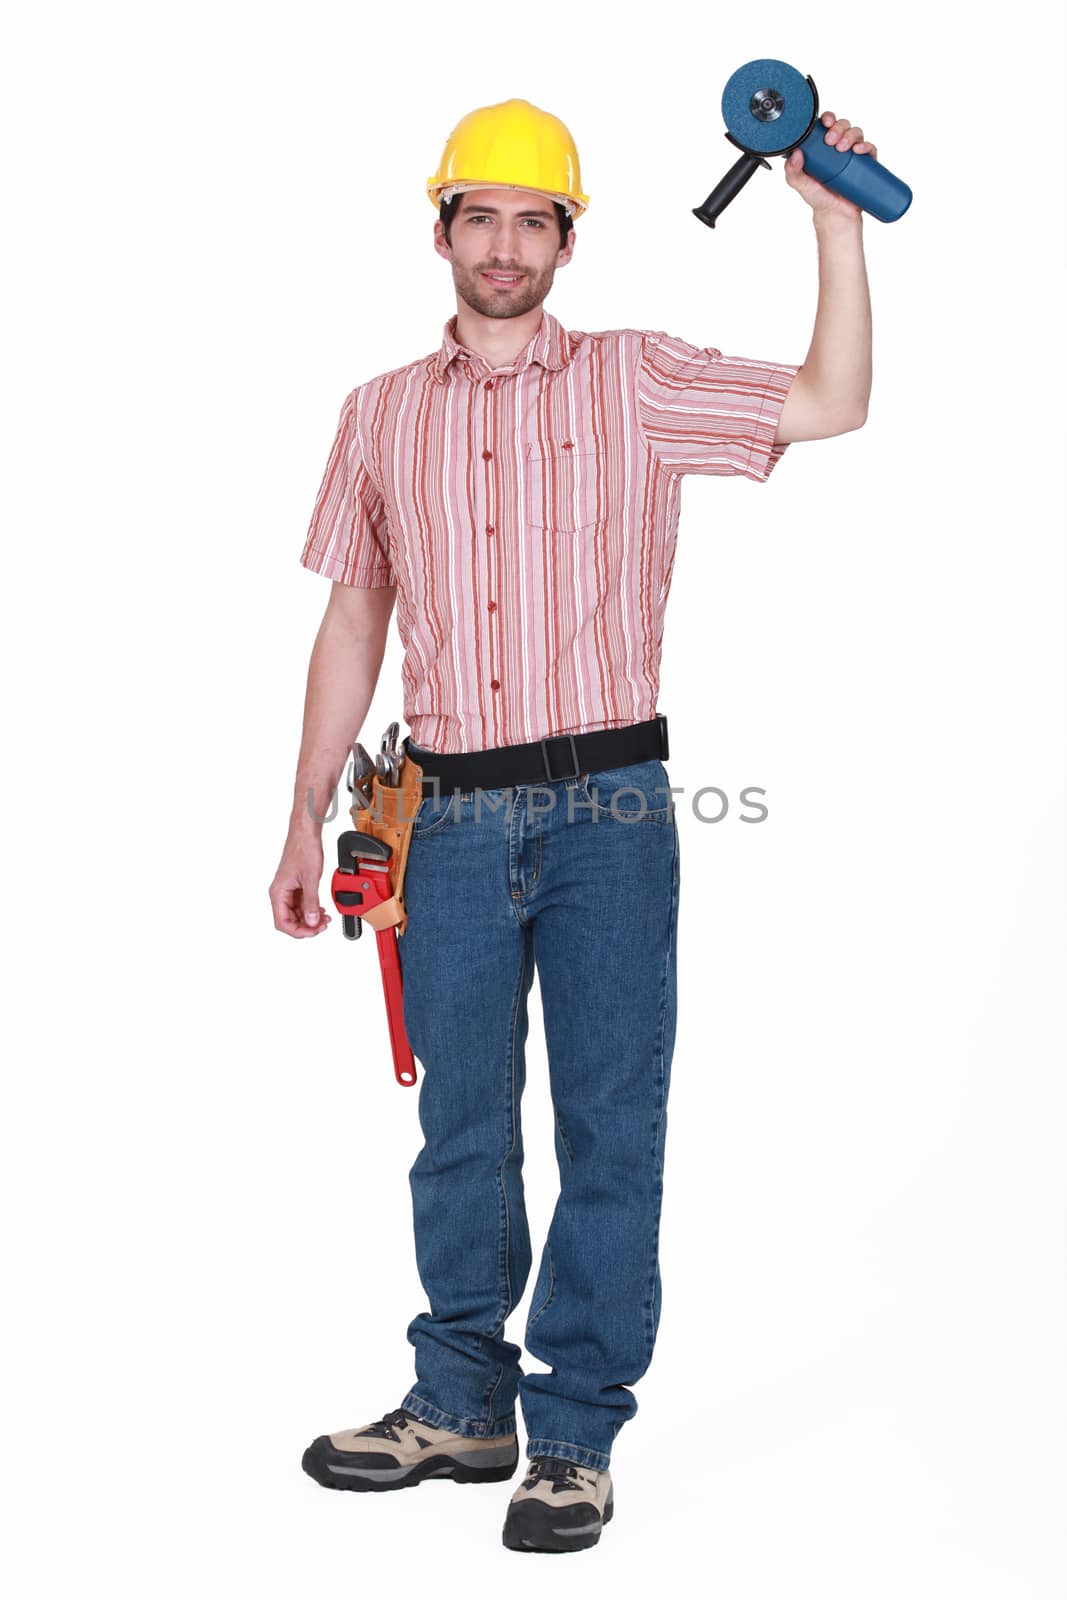 A handyman holding a grinding machine. by phovoir